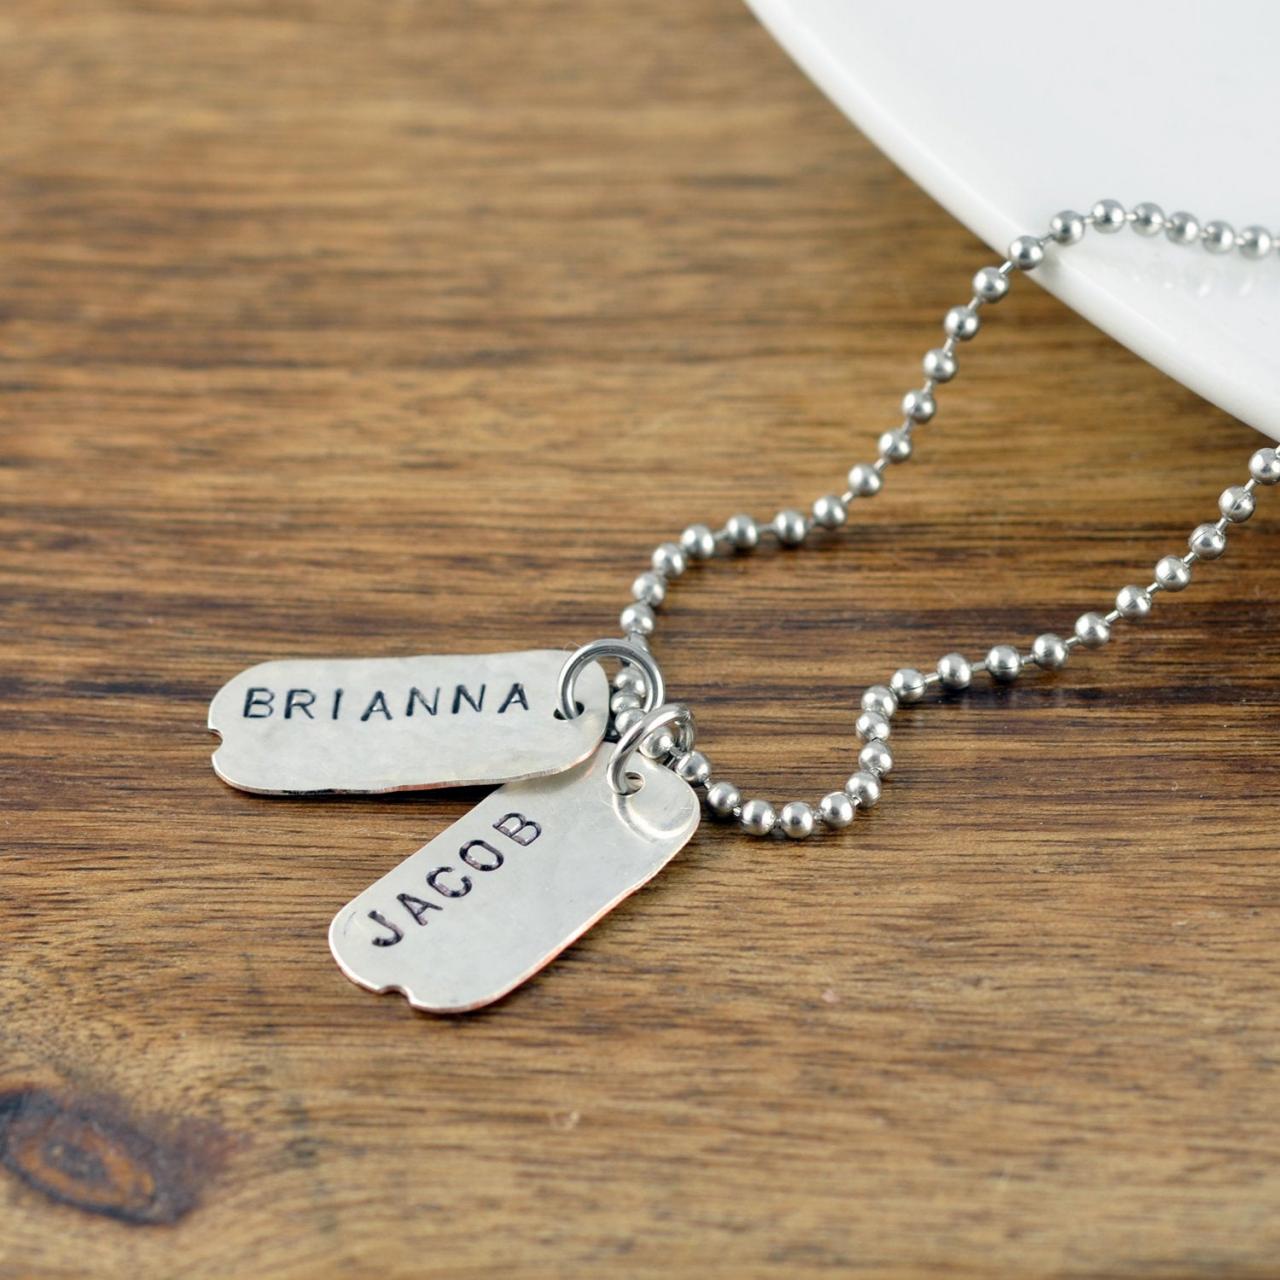 Fathers Day Gift, Mens Dog Tag Necklace, Personalized Mens Necklace, Mens Jewelry, Boyfriend Gift, Dad, Gift, Tag Necklace Personalized